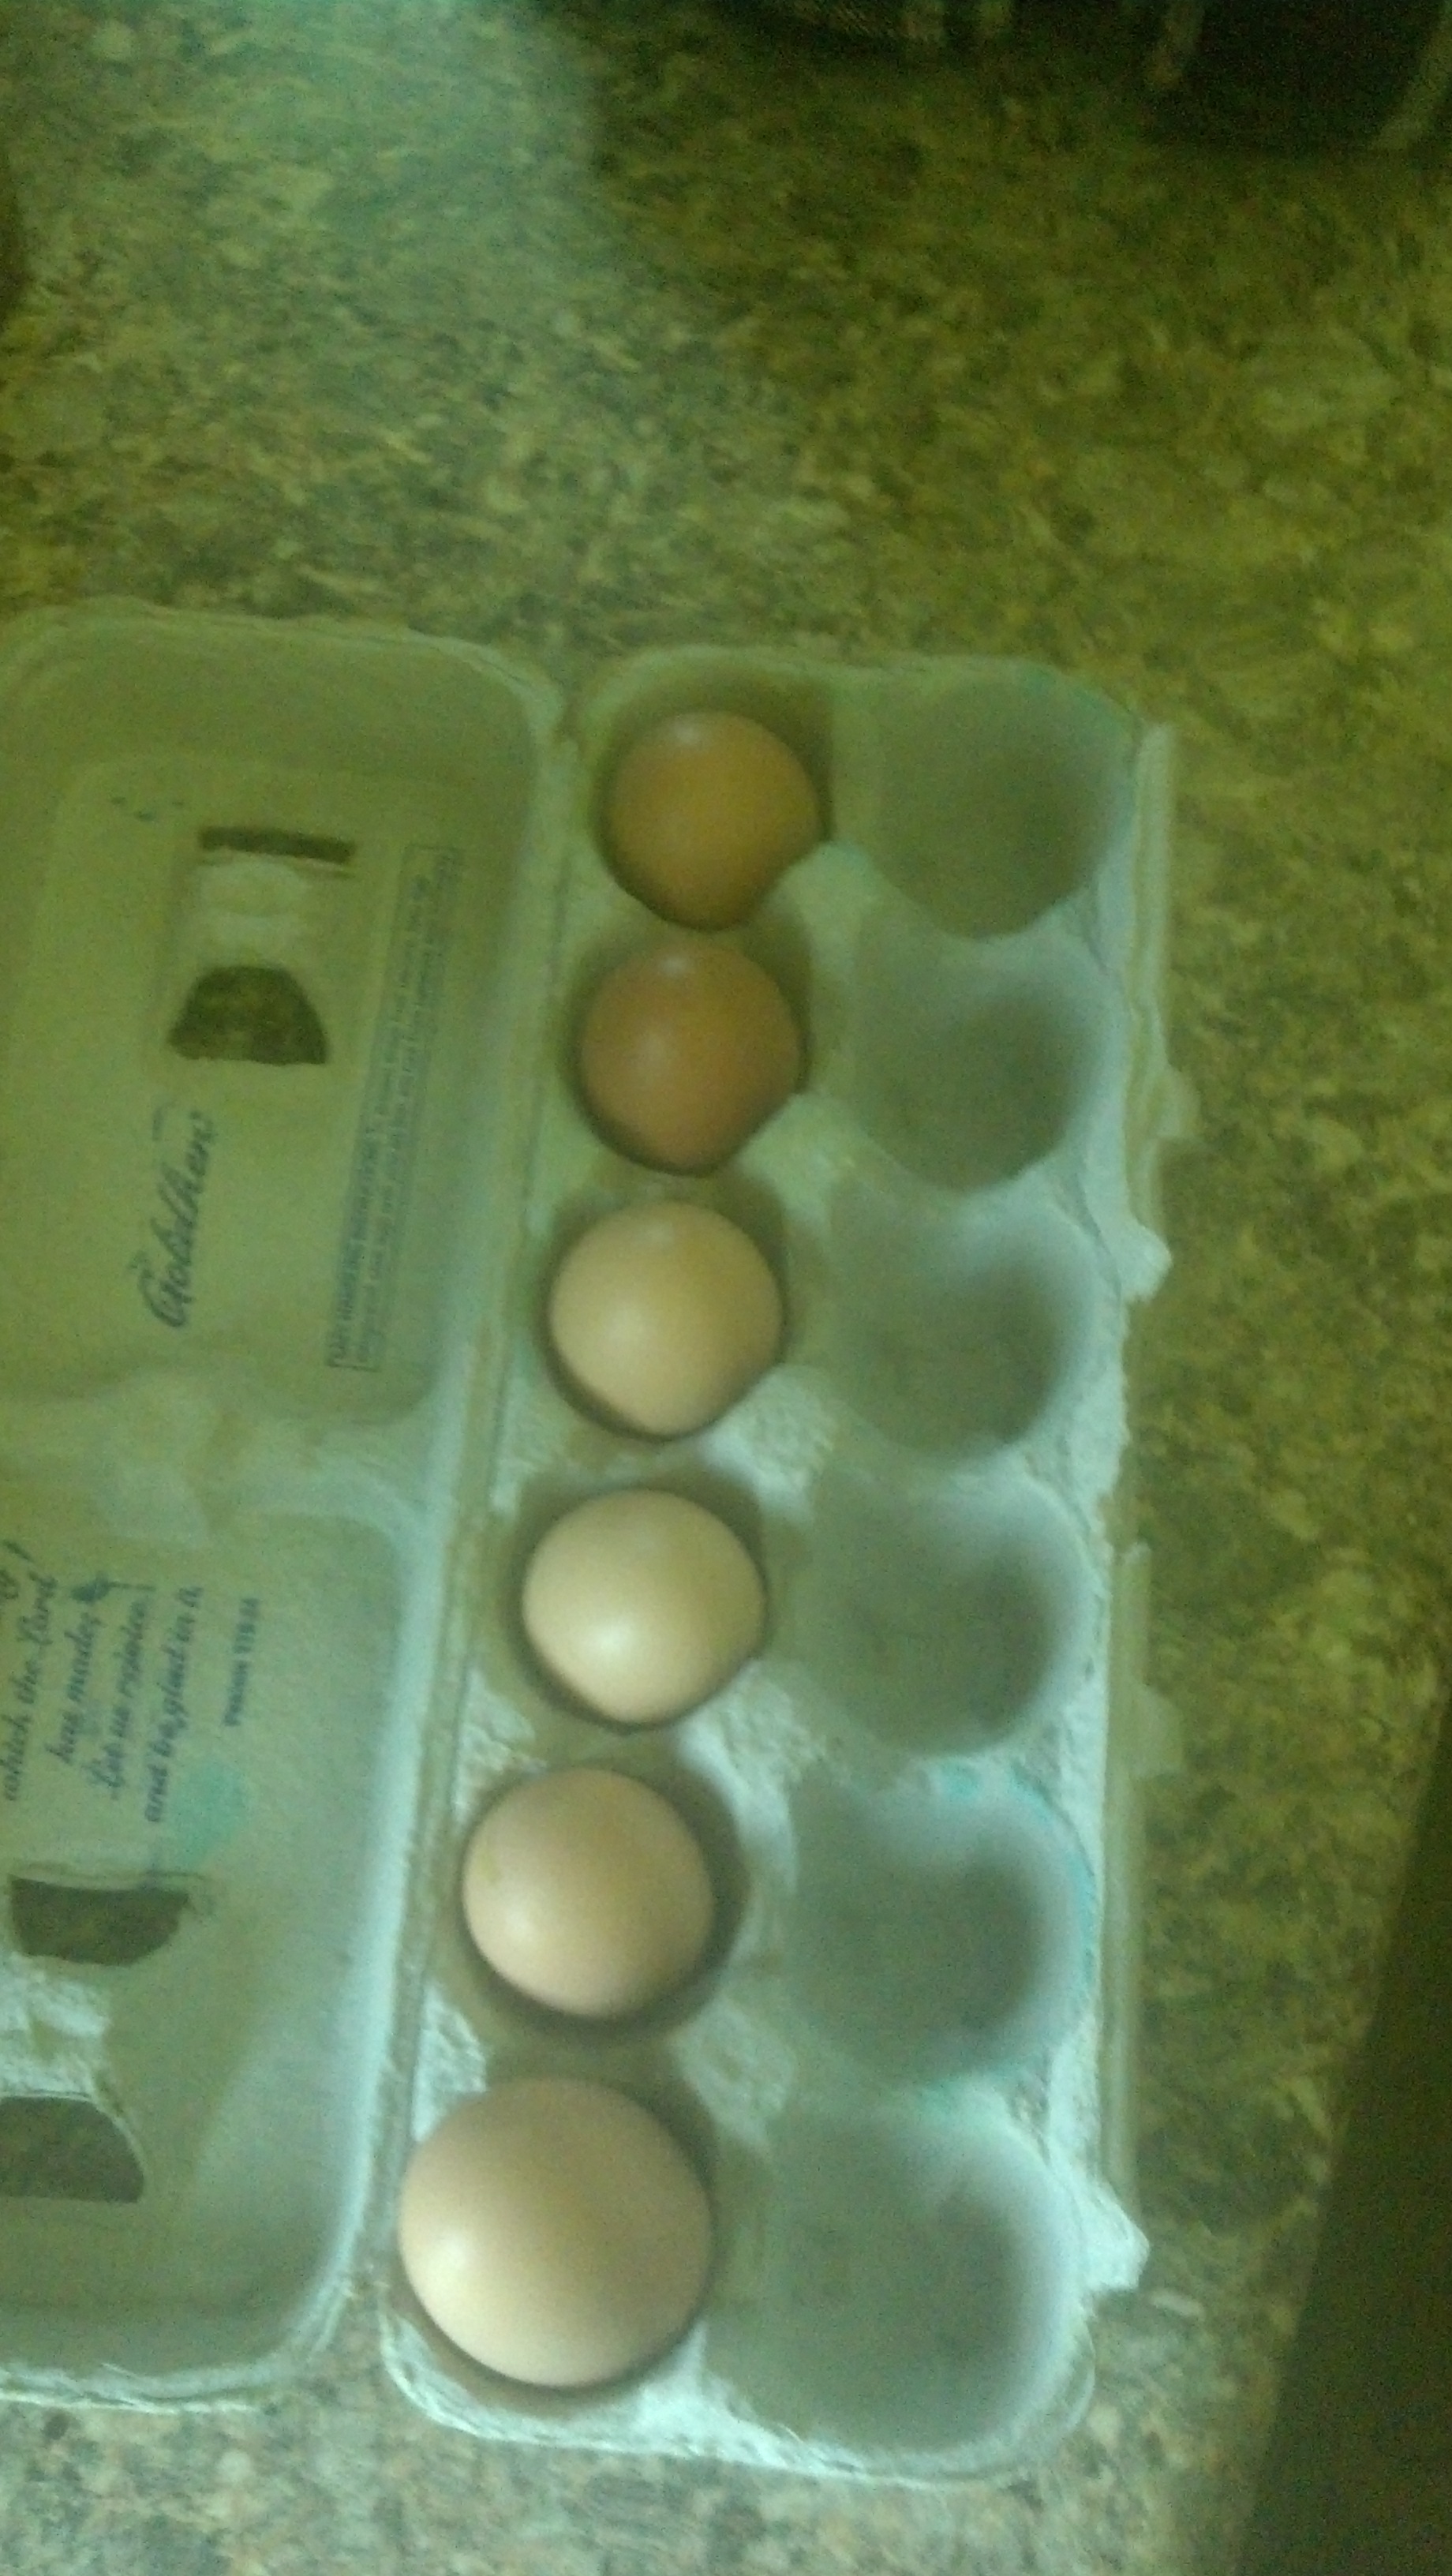 july 4th 2014 our 1st eggs laid by our reds